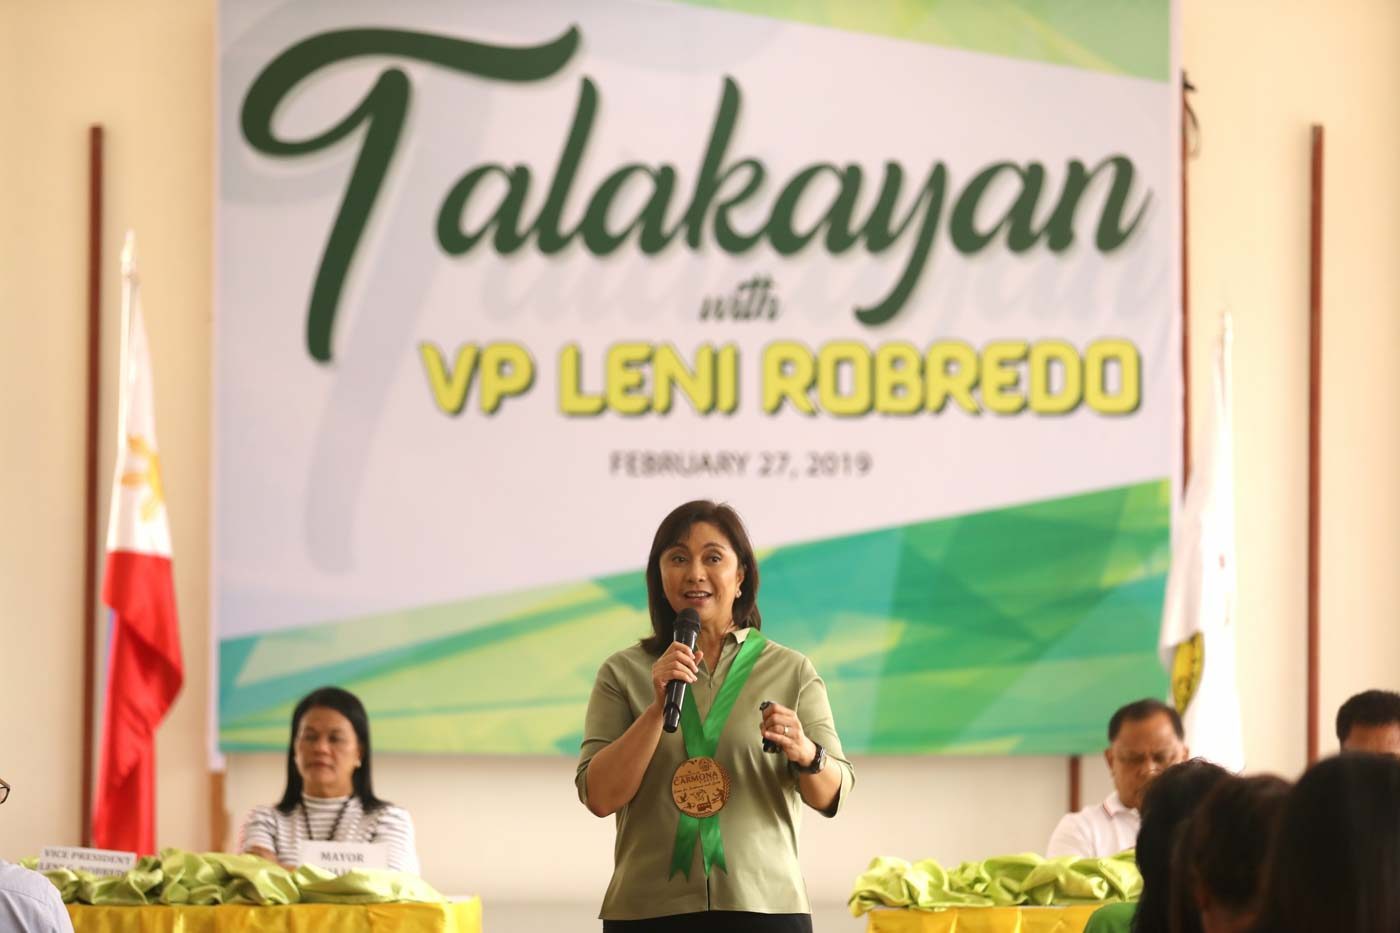 Robredo to candidates: Not bad to entertain, but discuss platforms too